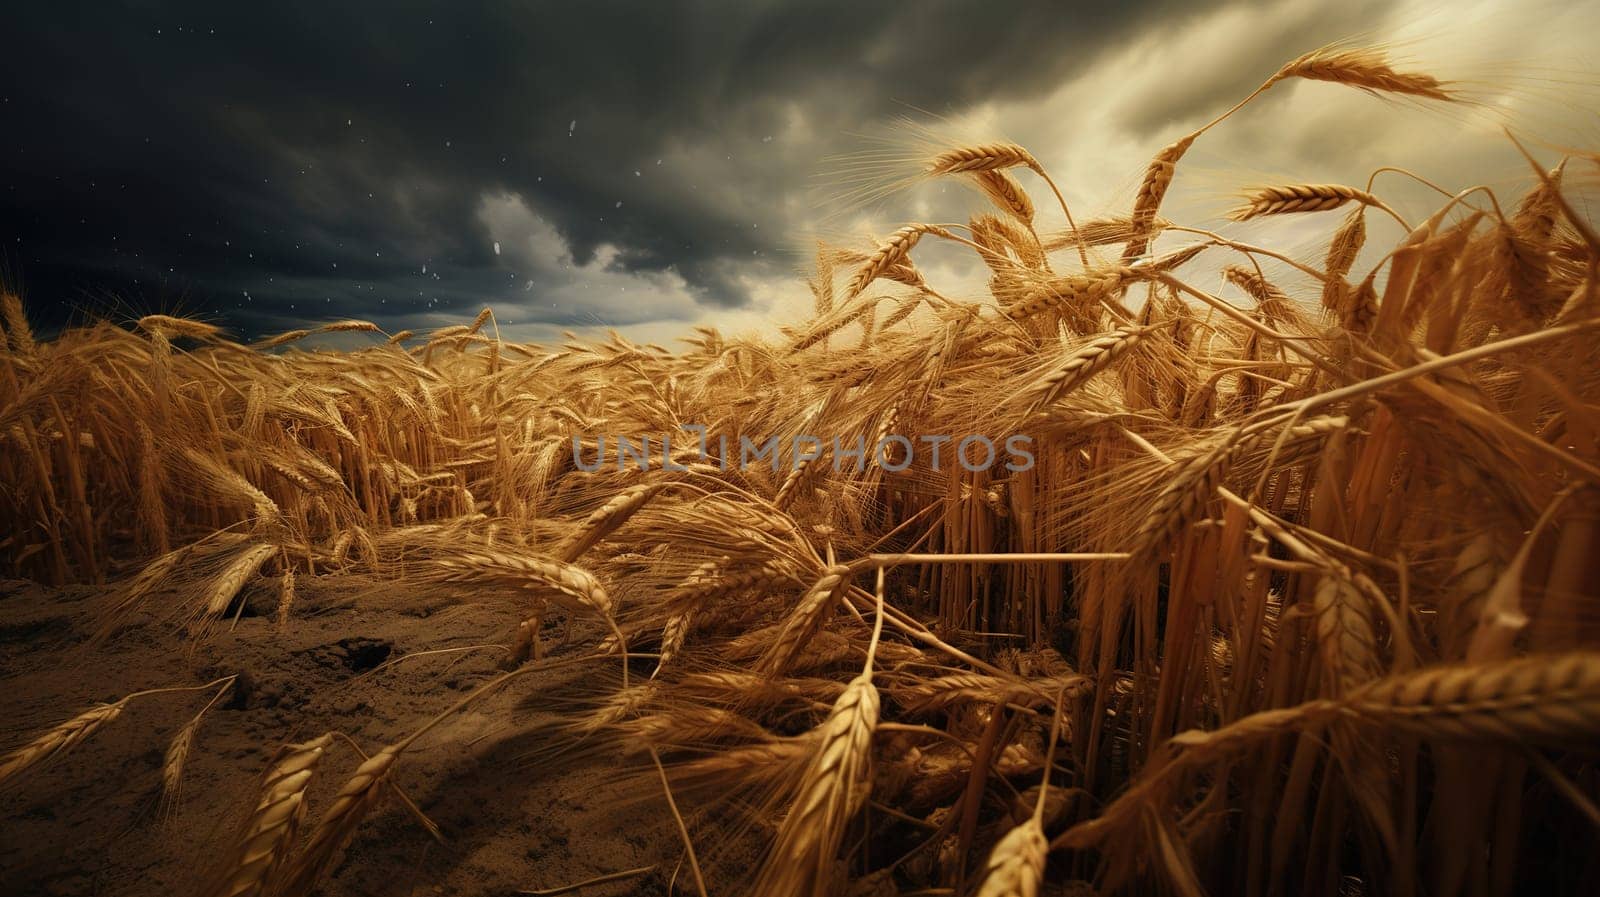 ripe ears of wheat in the field, damaged by a hurricane and wet in the rain, untimely harvest, food crisis by KaterinaDalemans